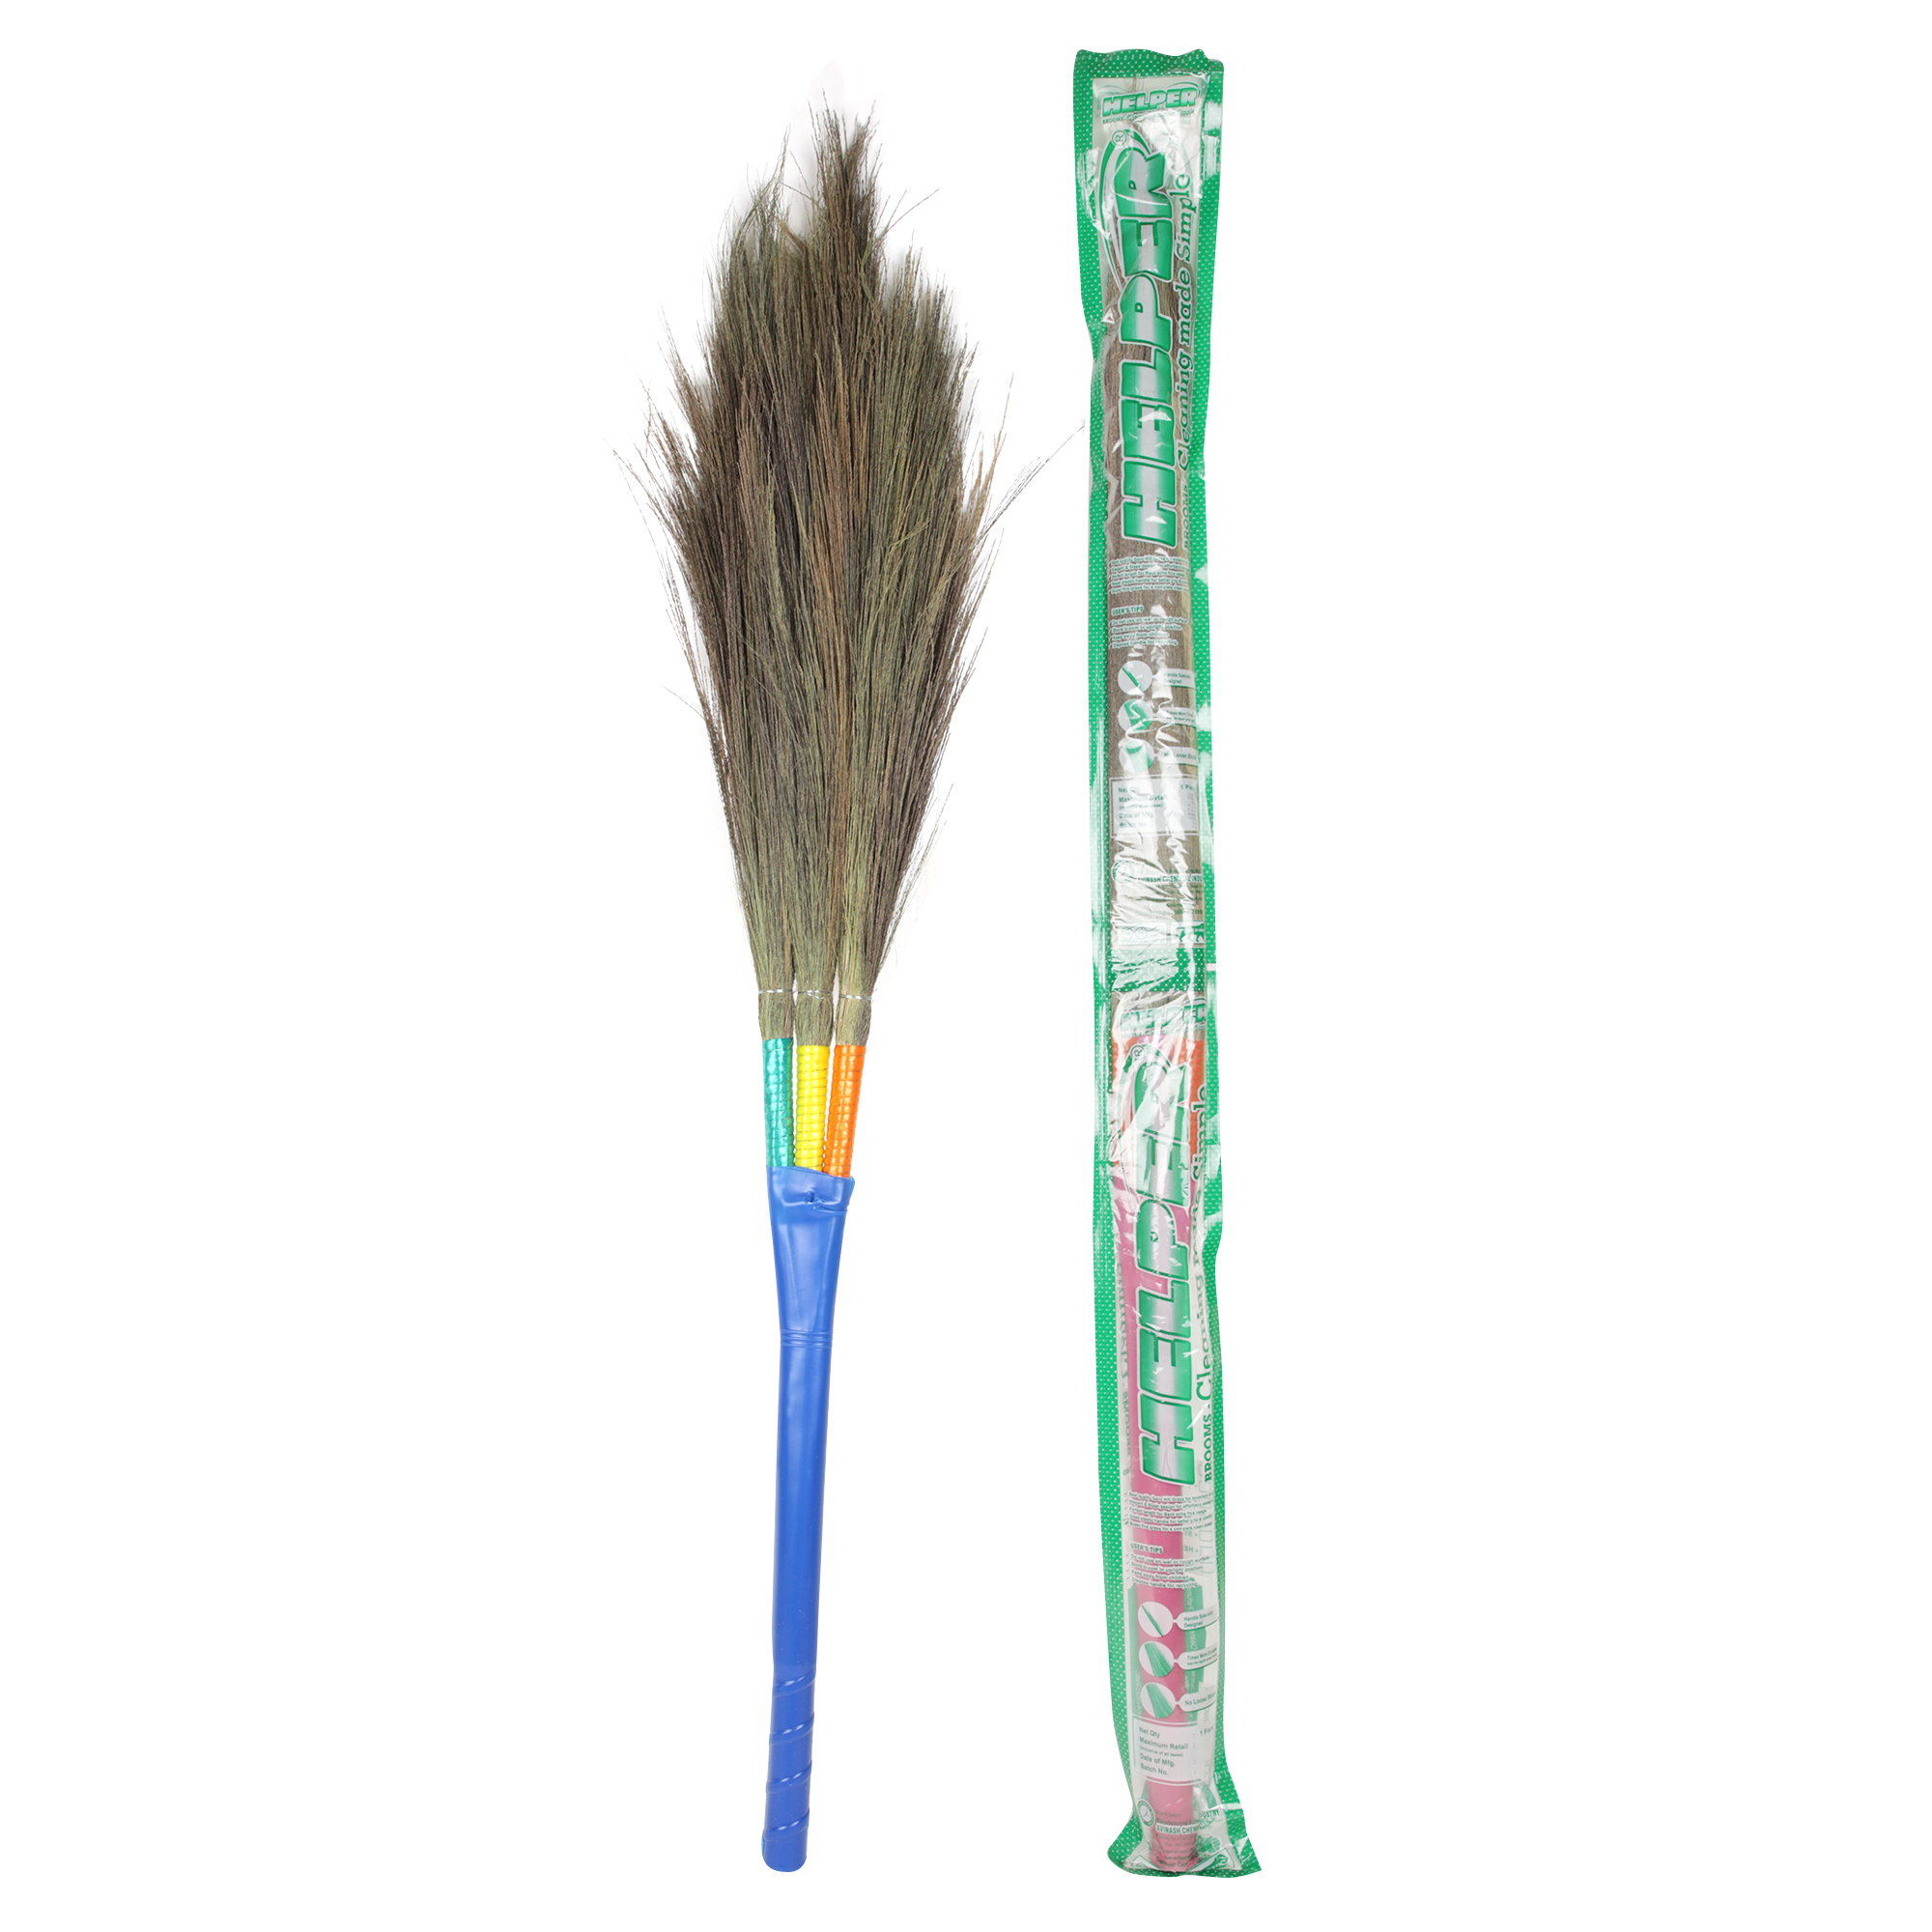 Helper Broom 3D Platinum Flat With Lace, 1Pc Pack